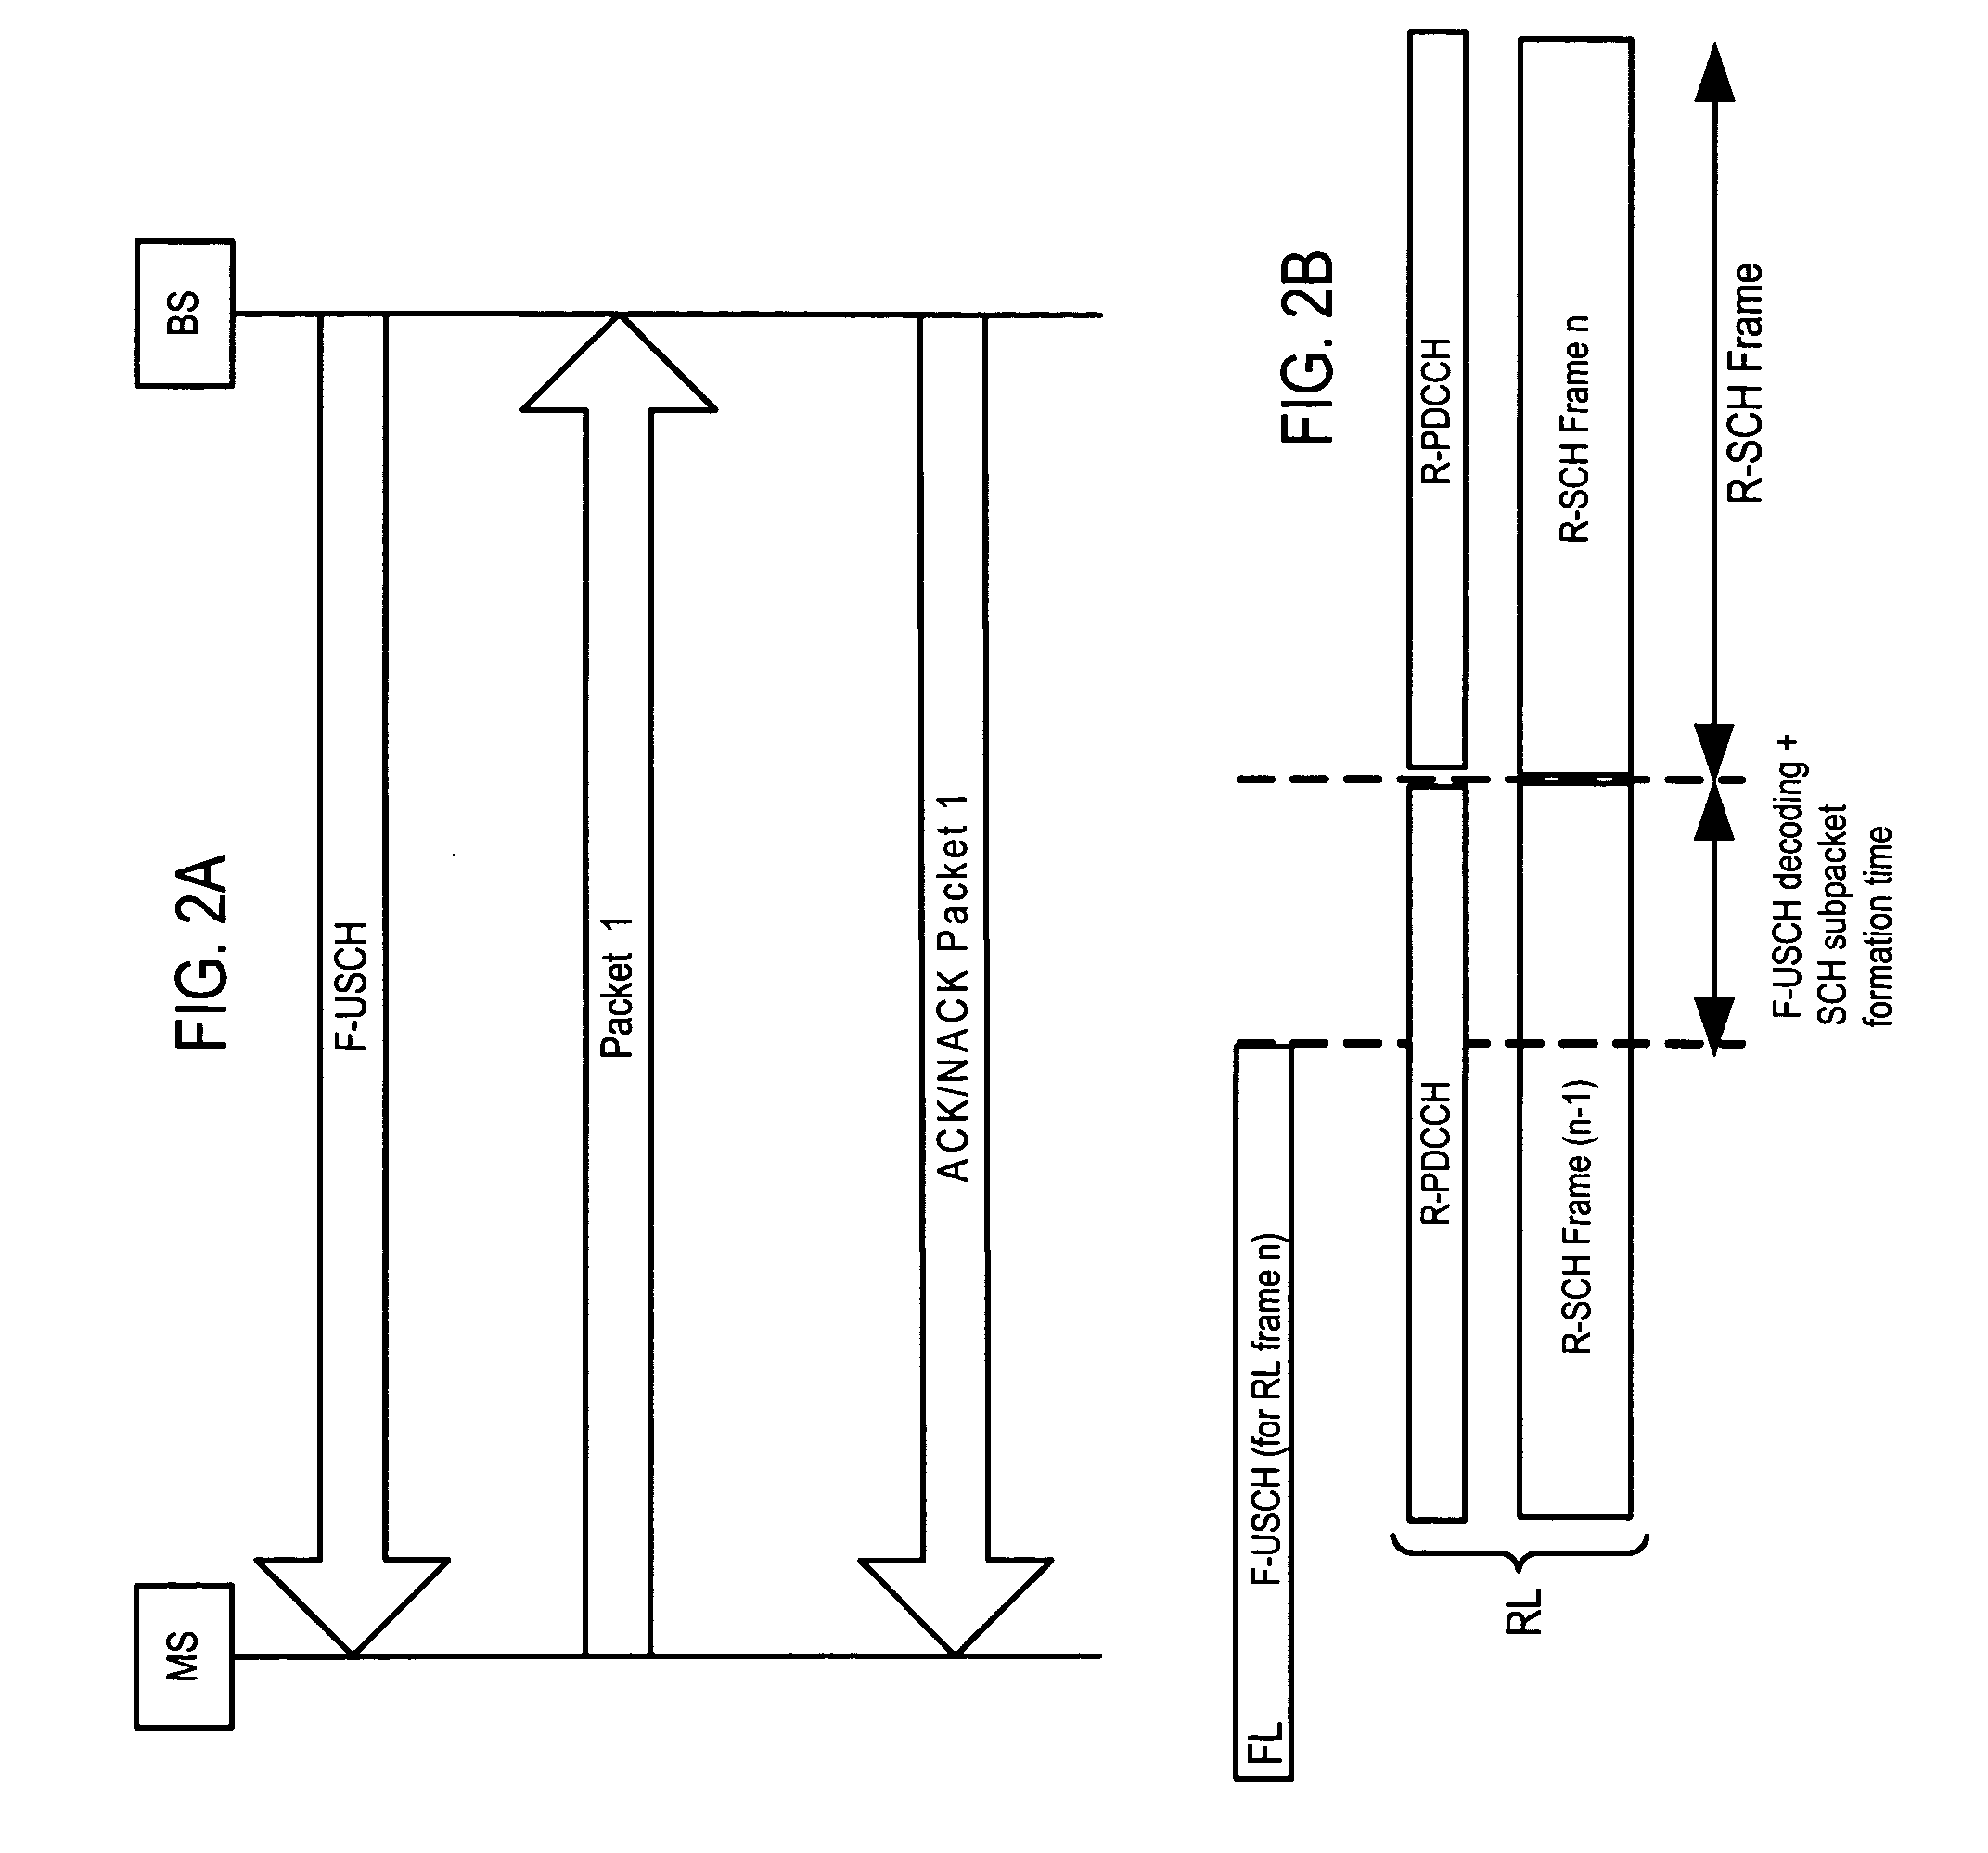 Method of interference cancellation in communication systems